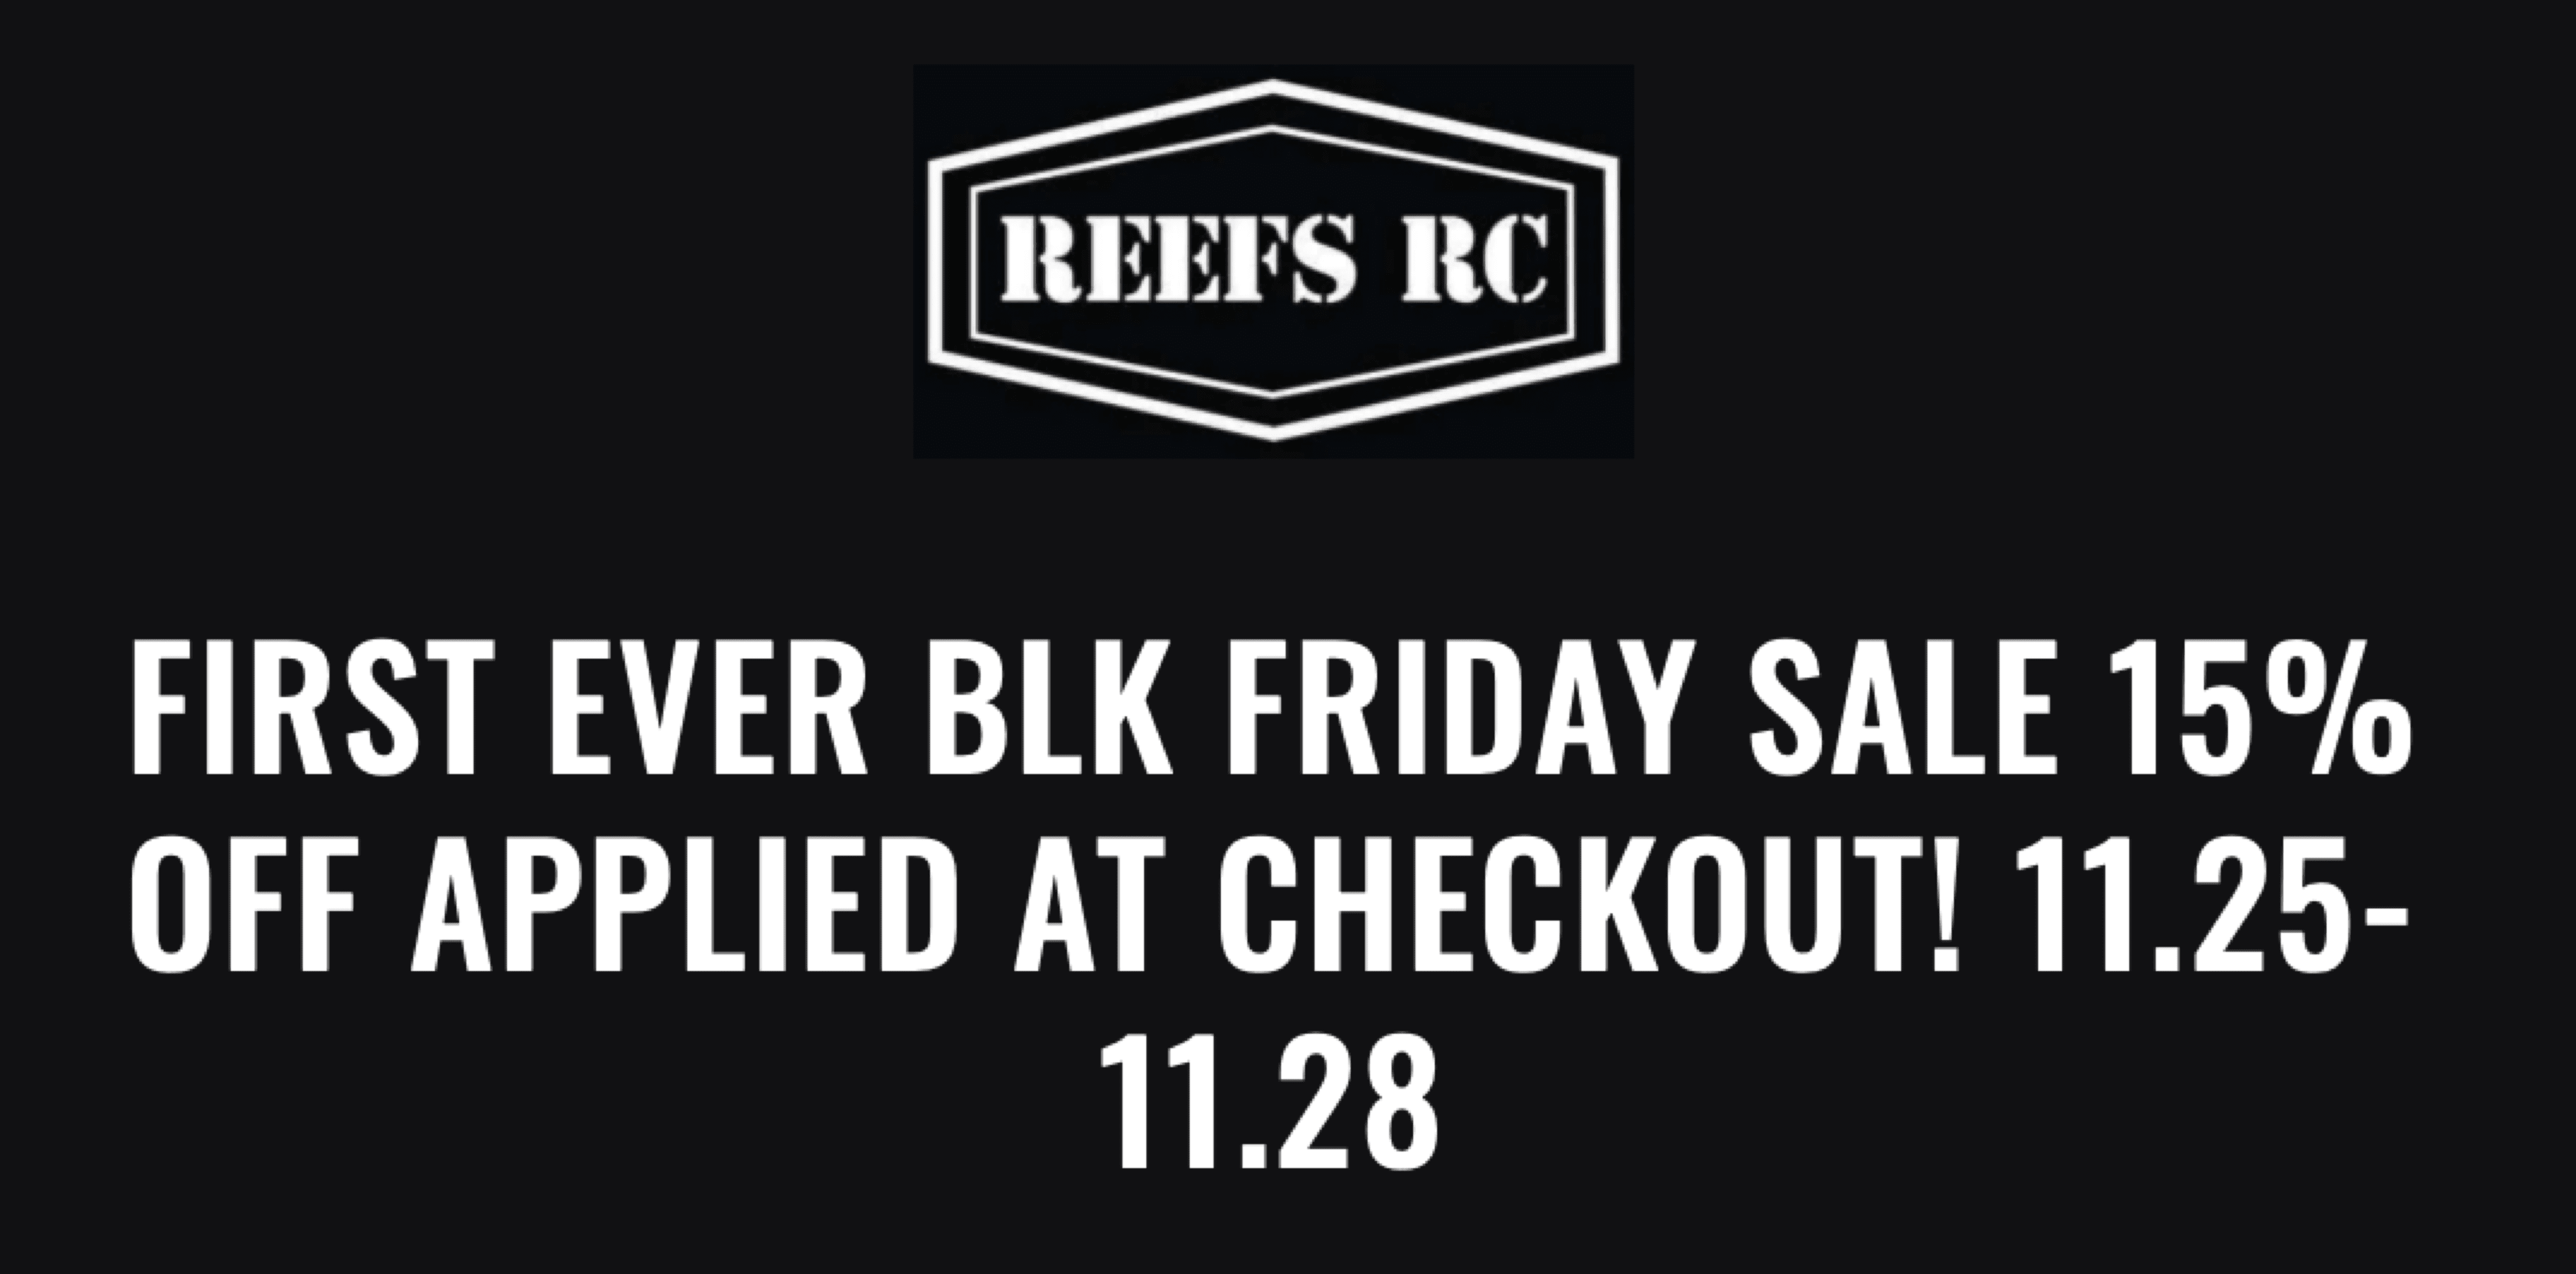 Enjoy 15%-Off Savings During REEFS RC’s First Black Friday Sale